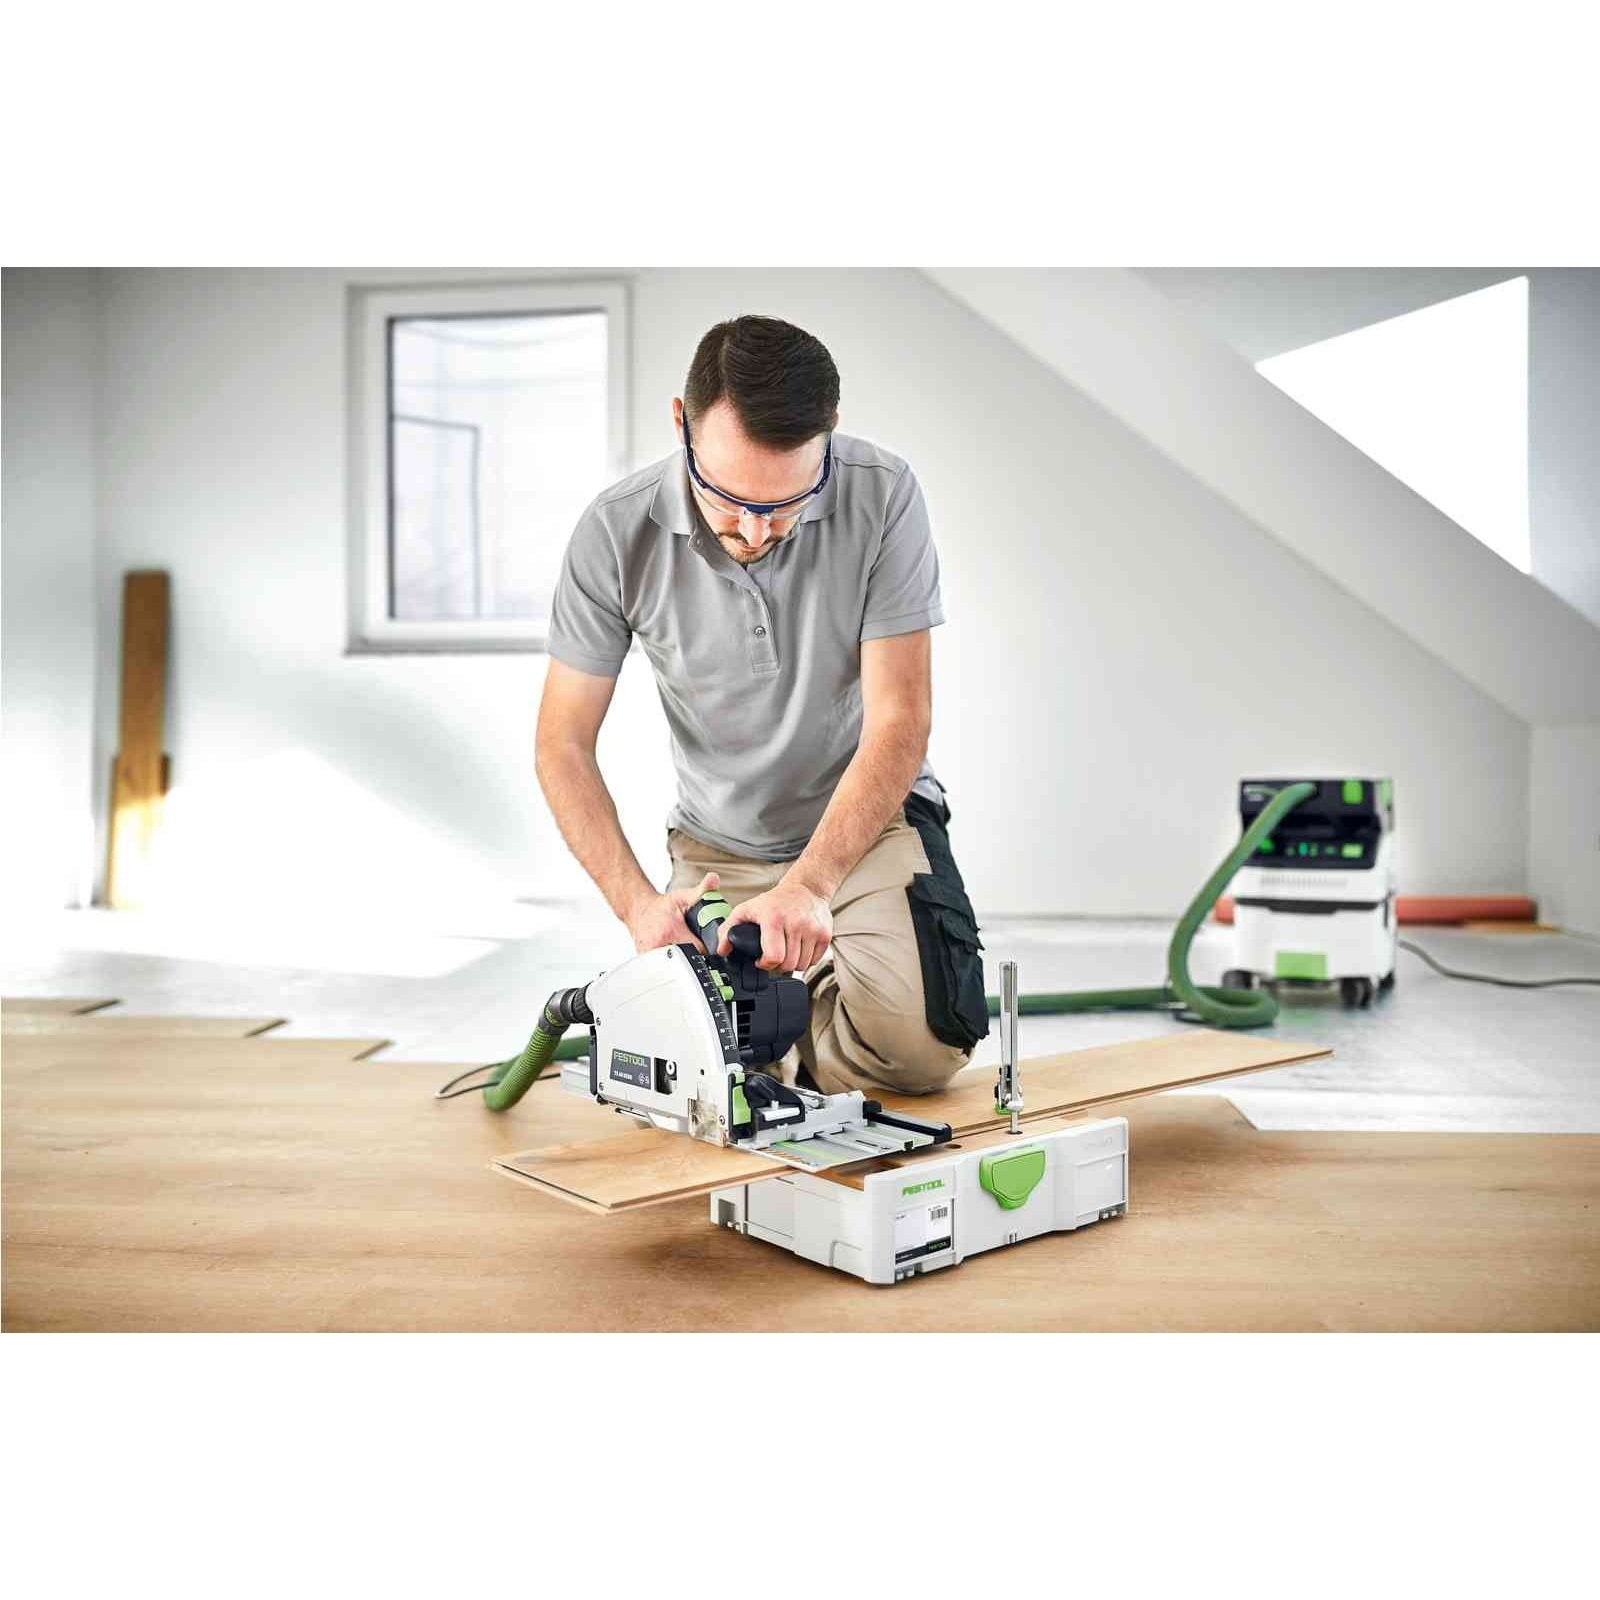 Festool 168mm Laminate Cutting Blade For TS 60K & CSC SYS 50,168x1.8x20 TF52A 205766 tool-junction-nz